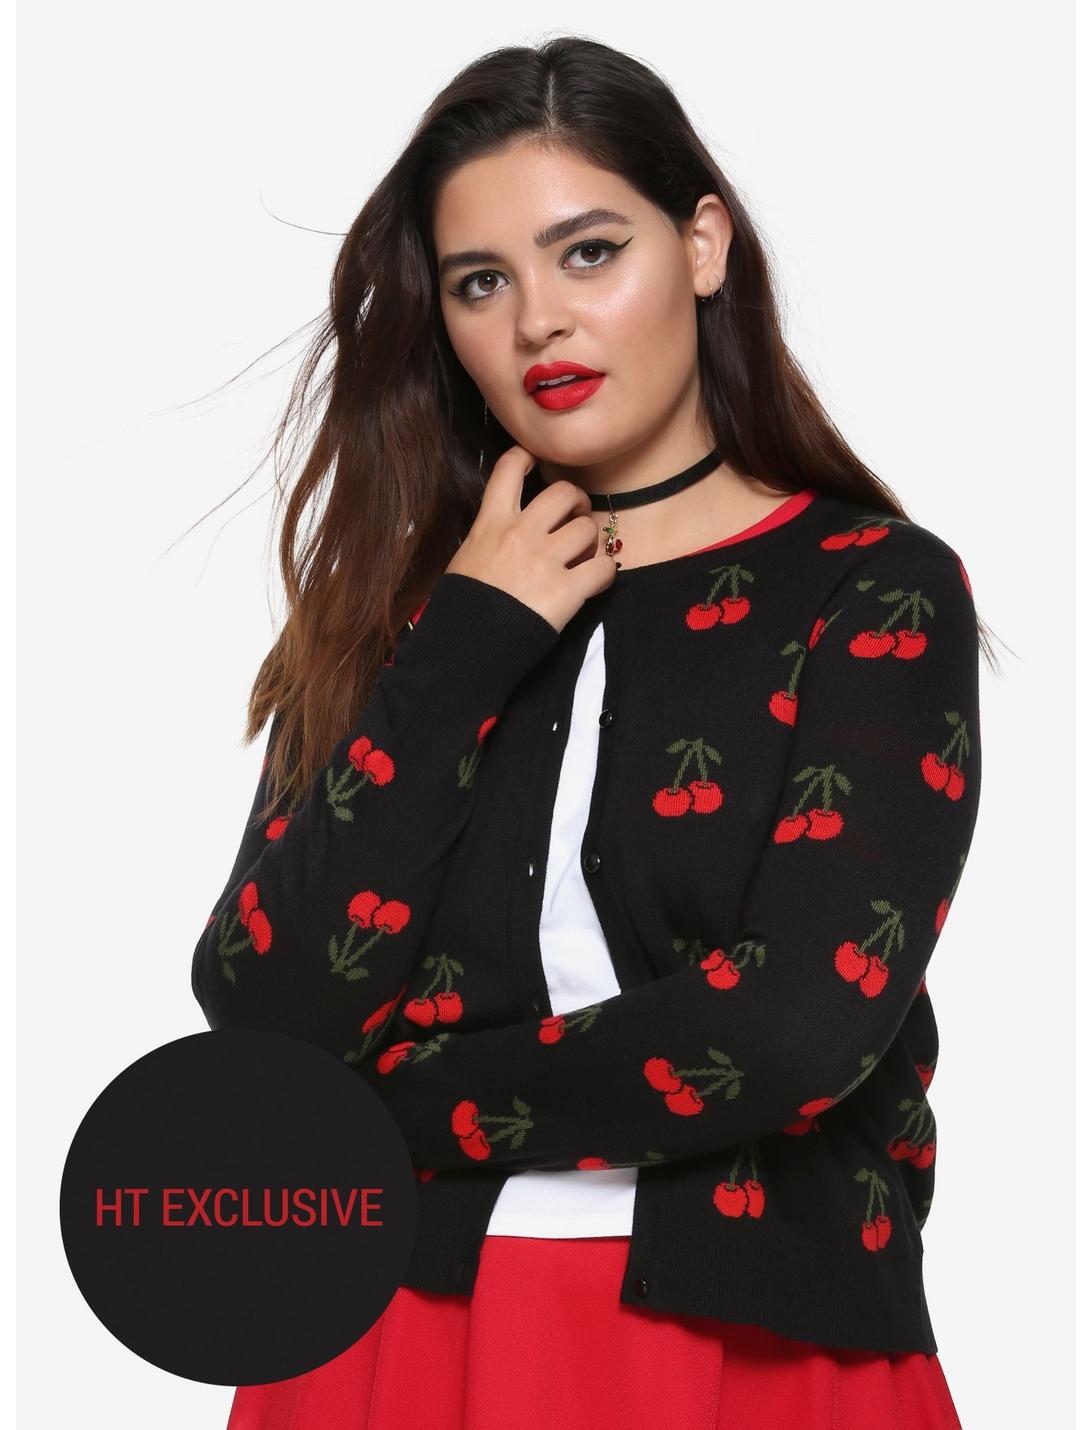 Riverdale Cheryl Blossom Intarsia Cherries Girls Cardigan Plus Size Hot Topic Exclusive, RED, hi-res